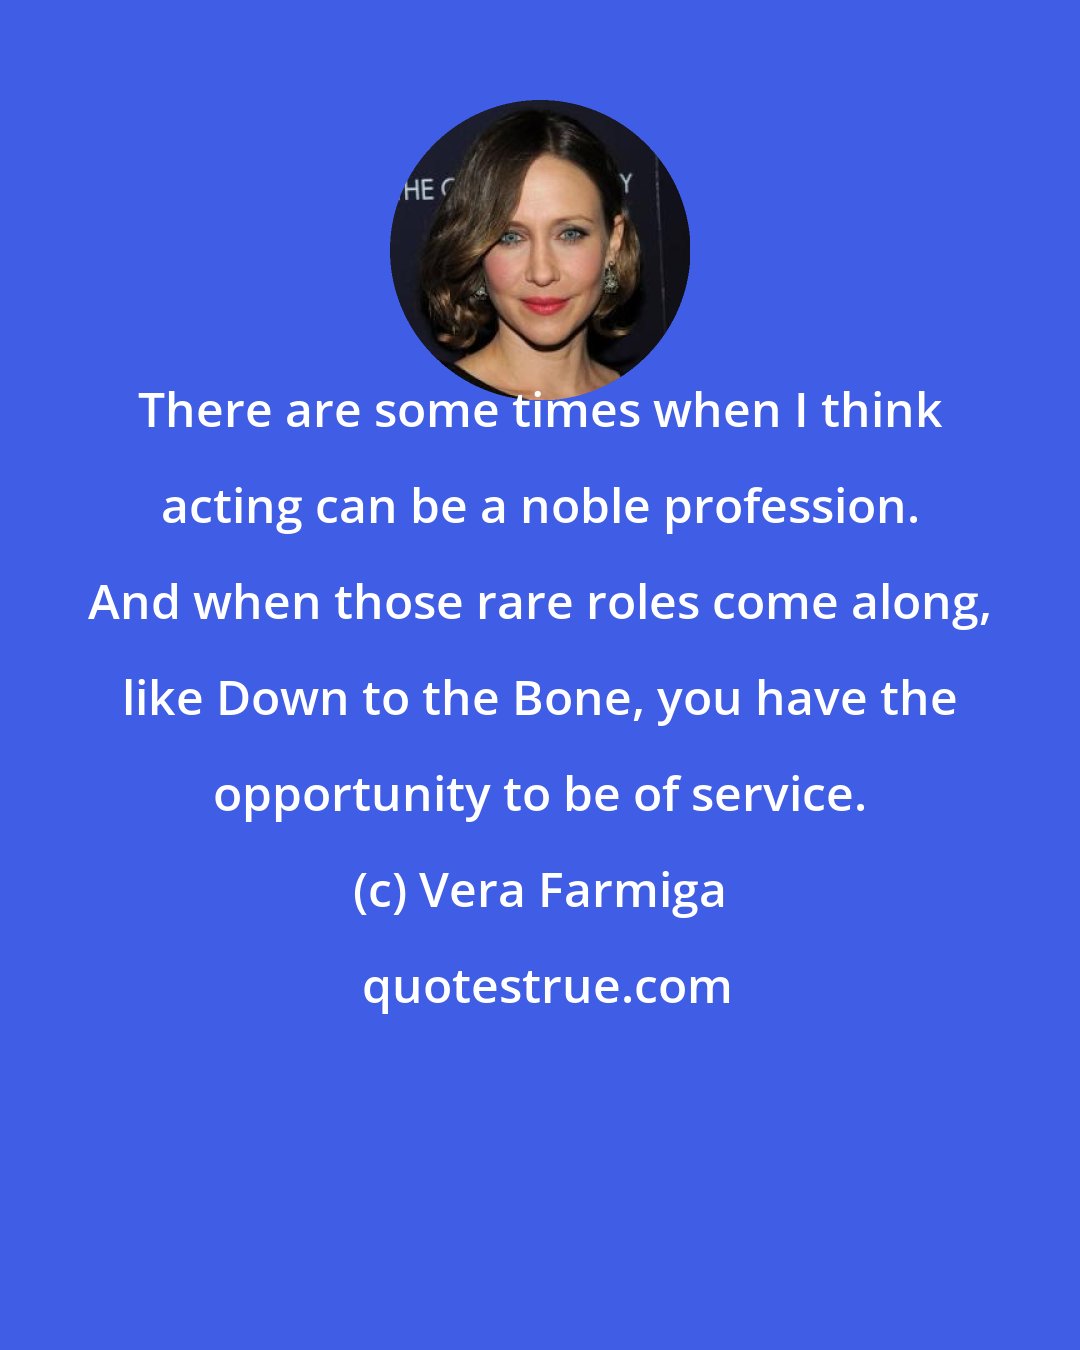 Vera Farmiga: There are some times when I think acting can be a noble profession. And when those rare roles come along, like Down to the Bone, you have the opportunity to be of service.